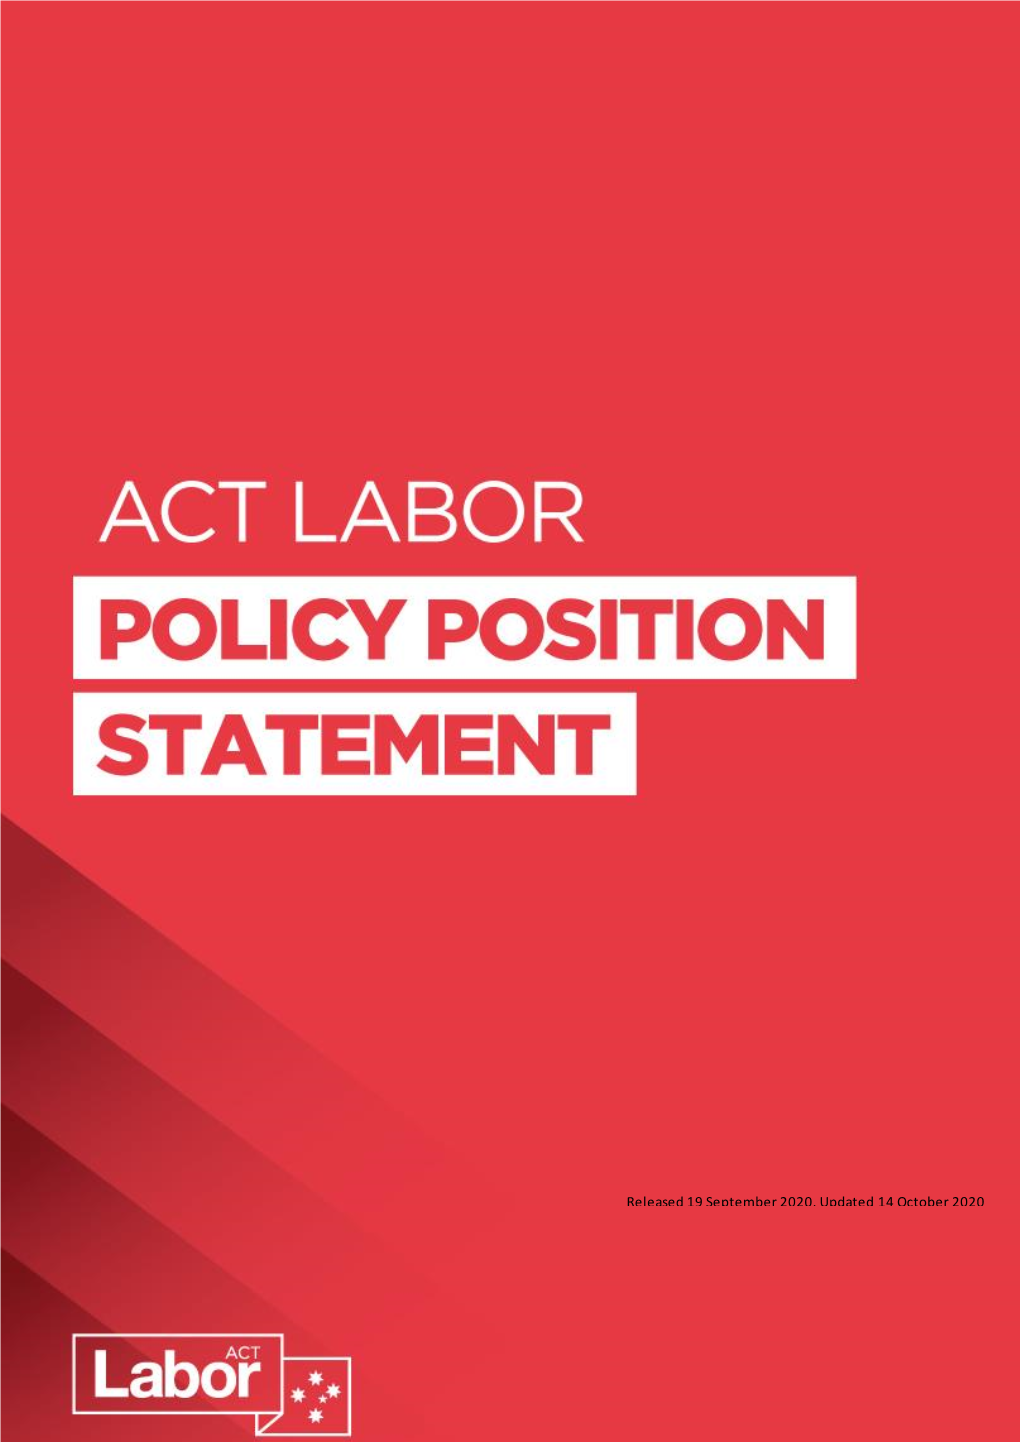 Policy Position Statement Is Available Here